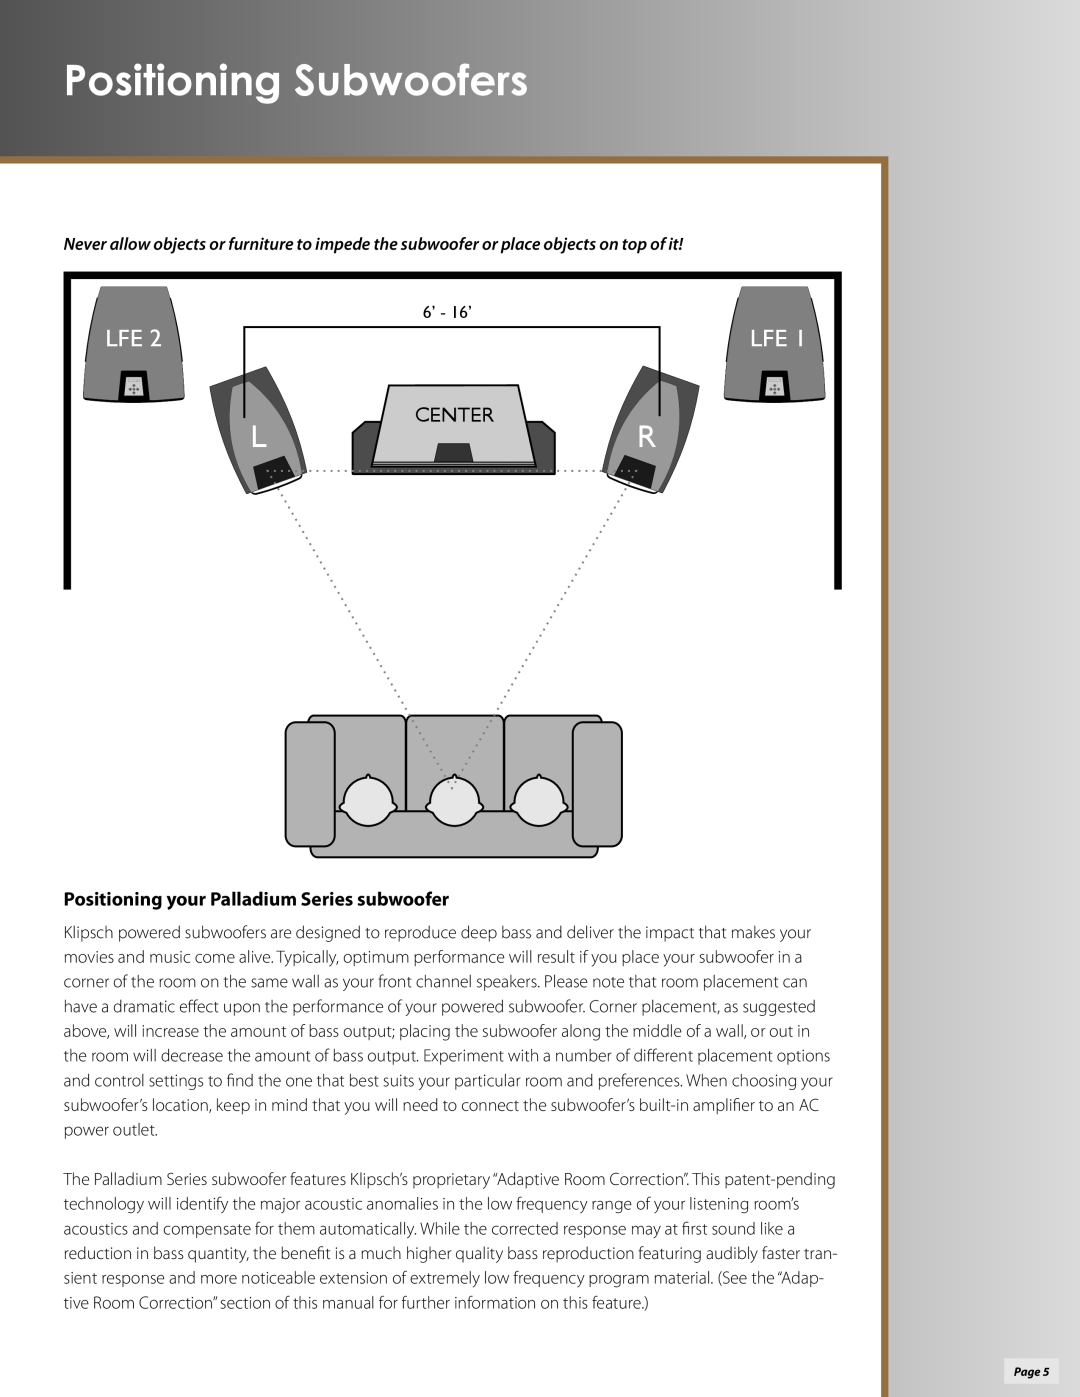 Klipsch P-312W owner manual Positioning Subwoofers, Positioning your Palladium Series subwoofer, Center, 6’ - 16’ 